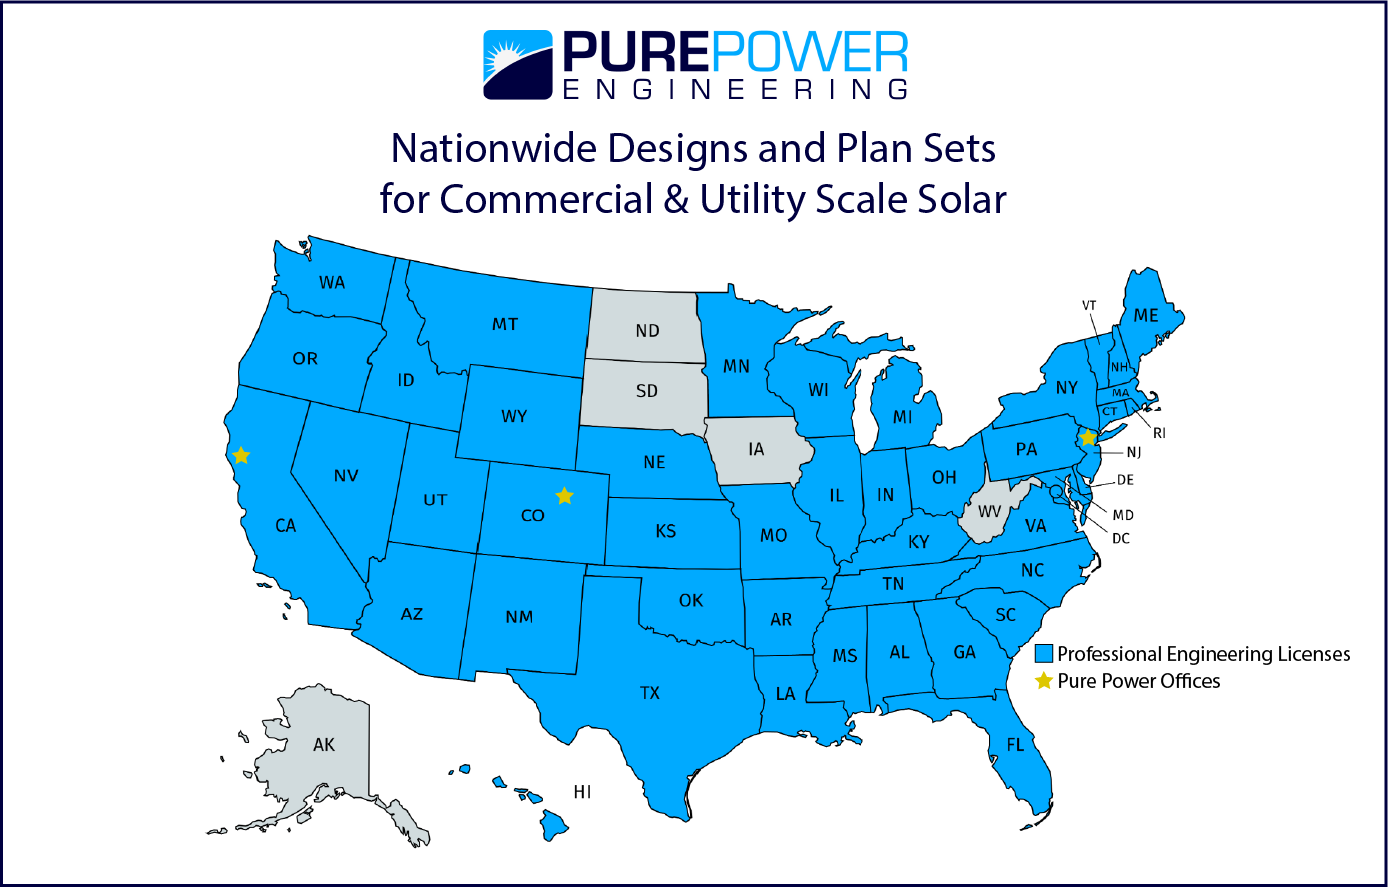 Nationwide Designs and Plan Sets for Commercial & Utility Scale Solar